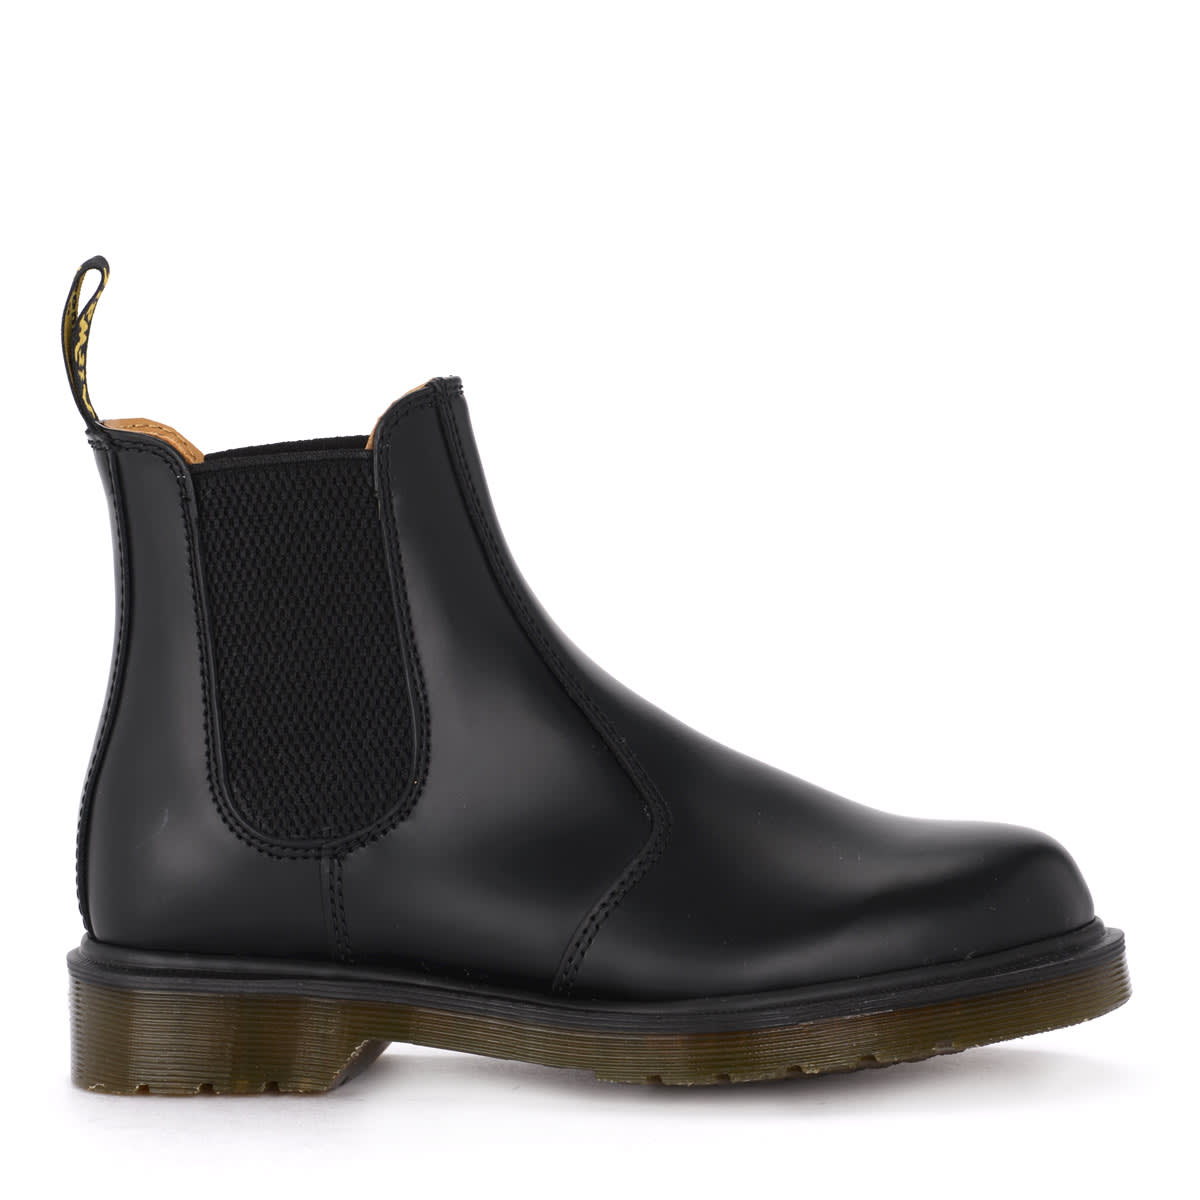 Buy Dr. Martens 2976 Black Leather Ankle Boots online, shop Dr. Martens shoes with free shipping